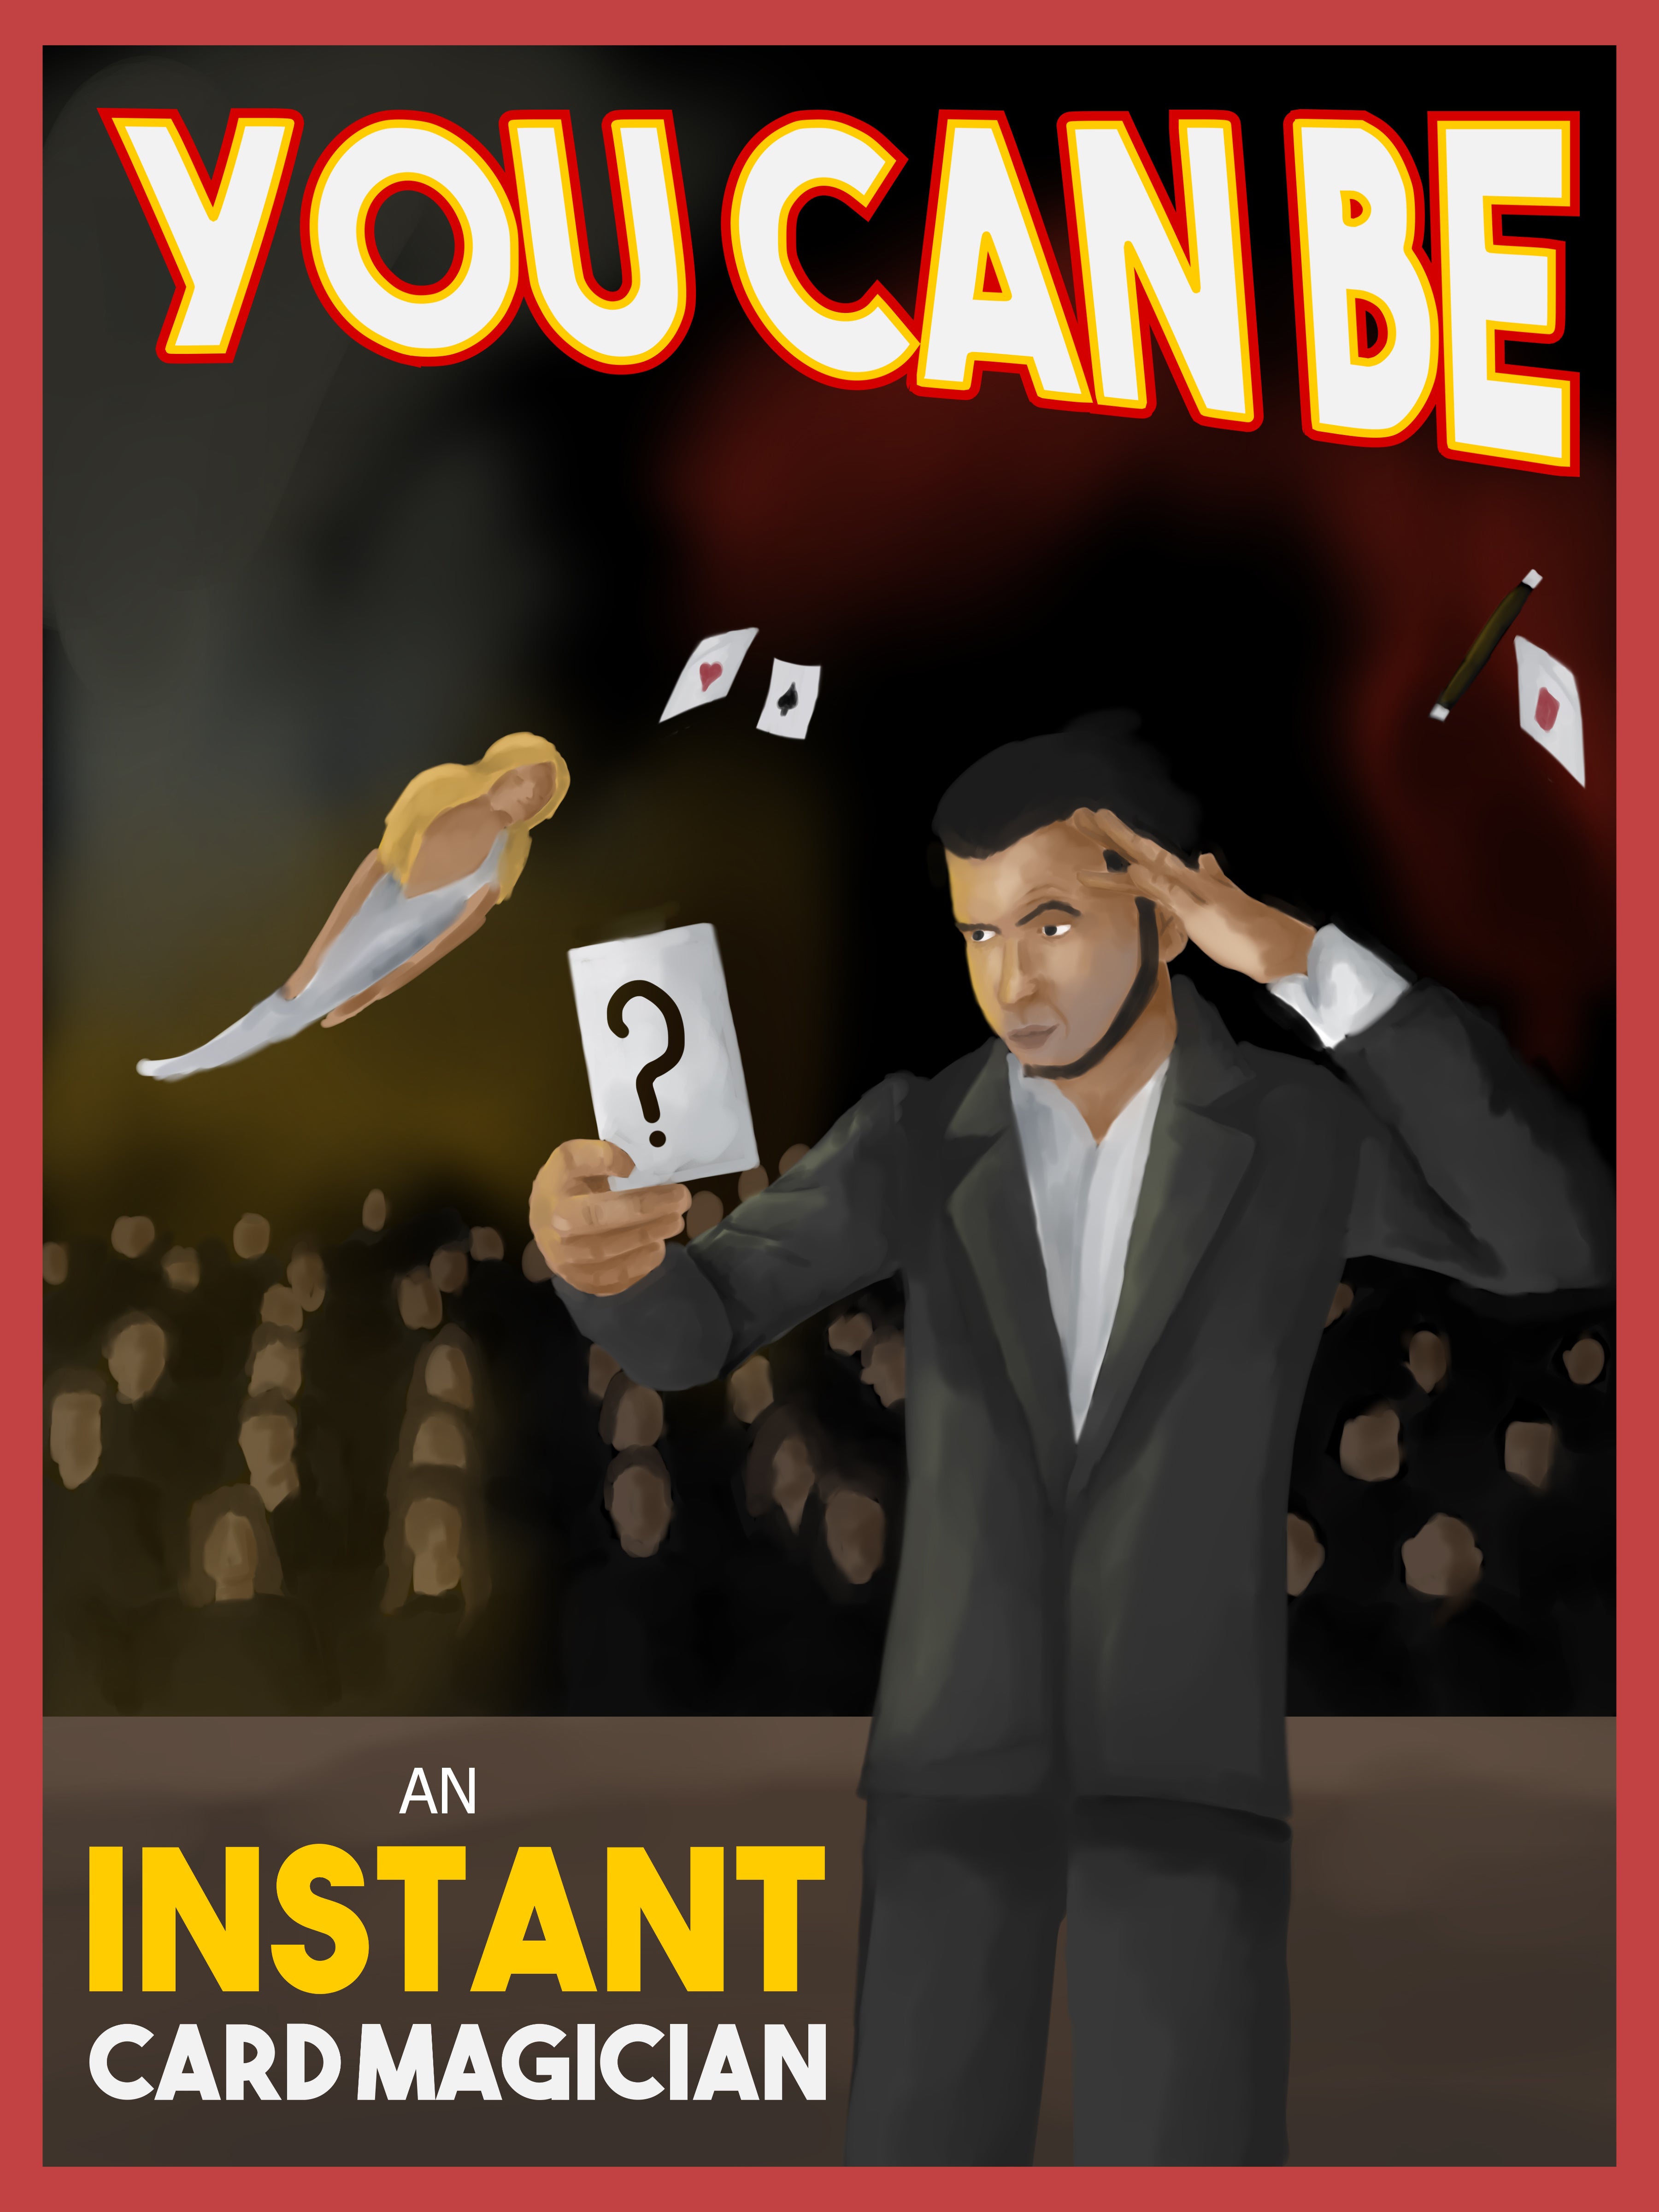 The Instant Card Magician